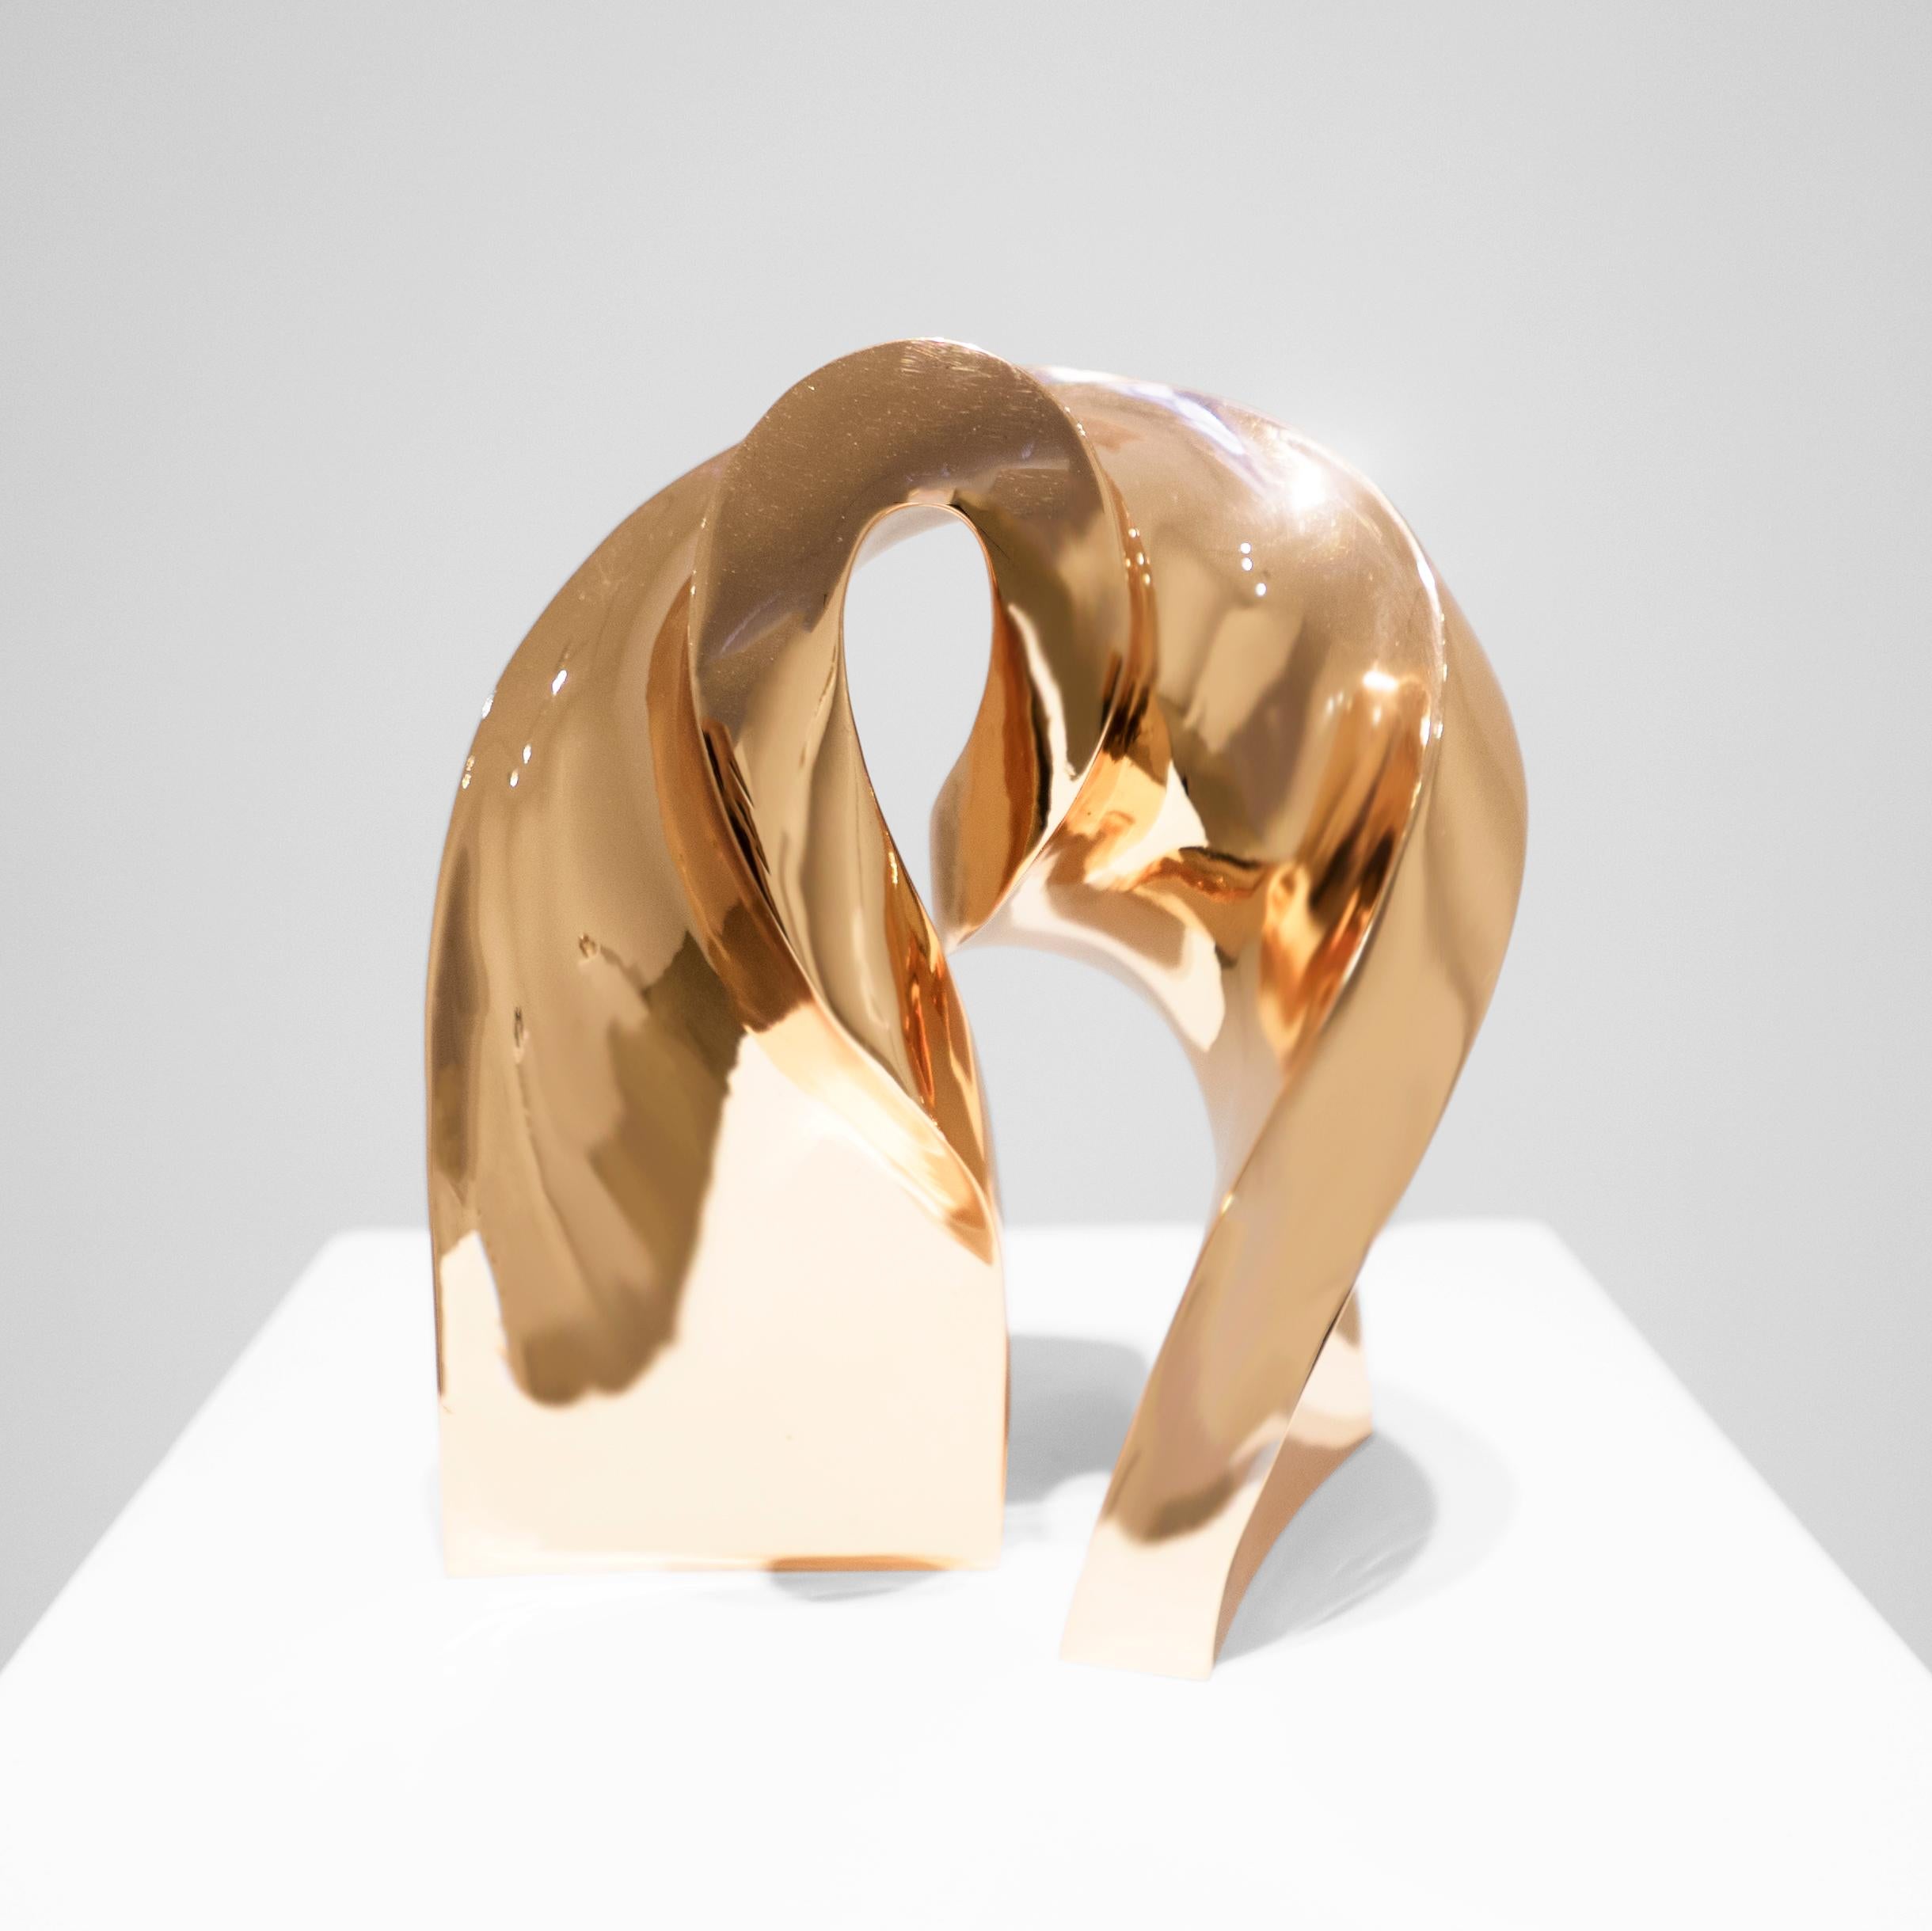 Stephanie Bachiero Abstract Sculpture - Hysteresis